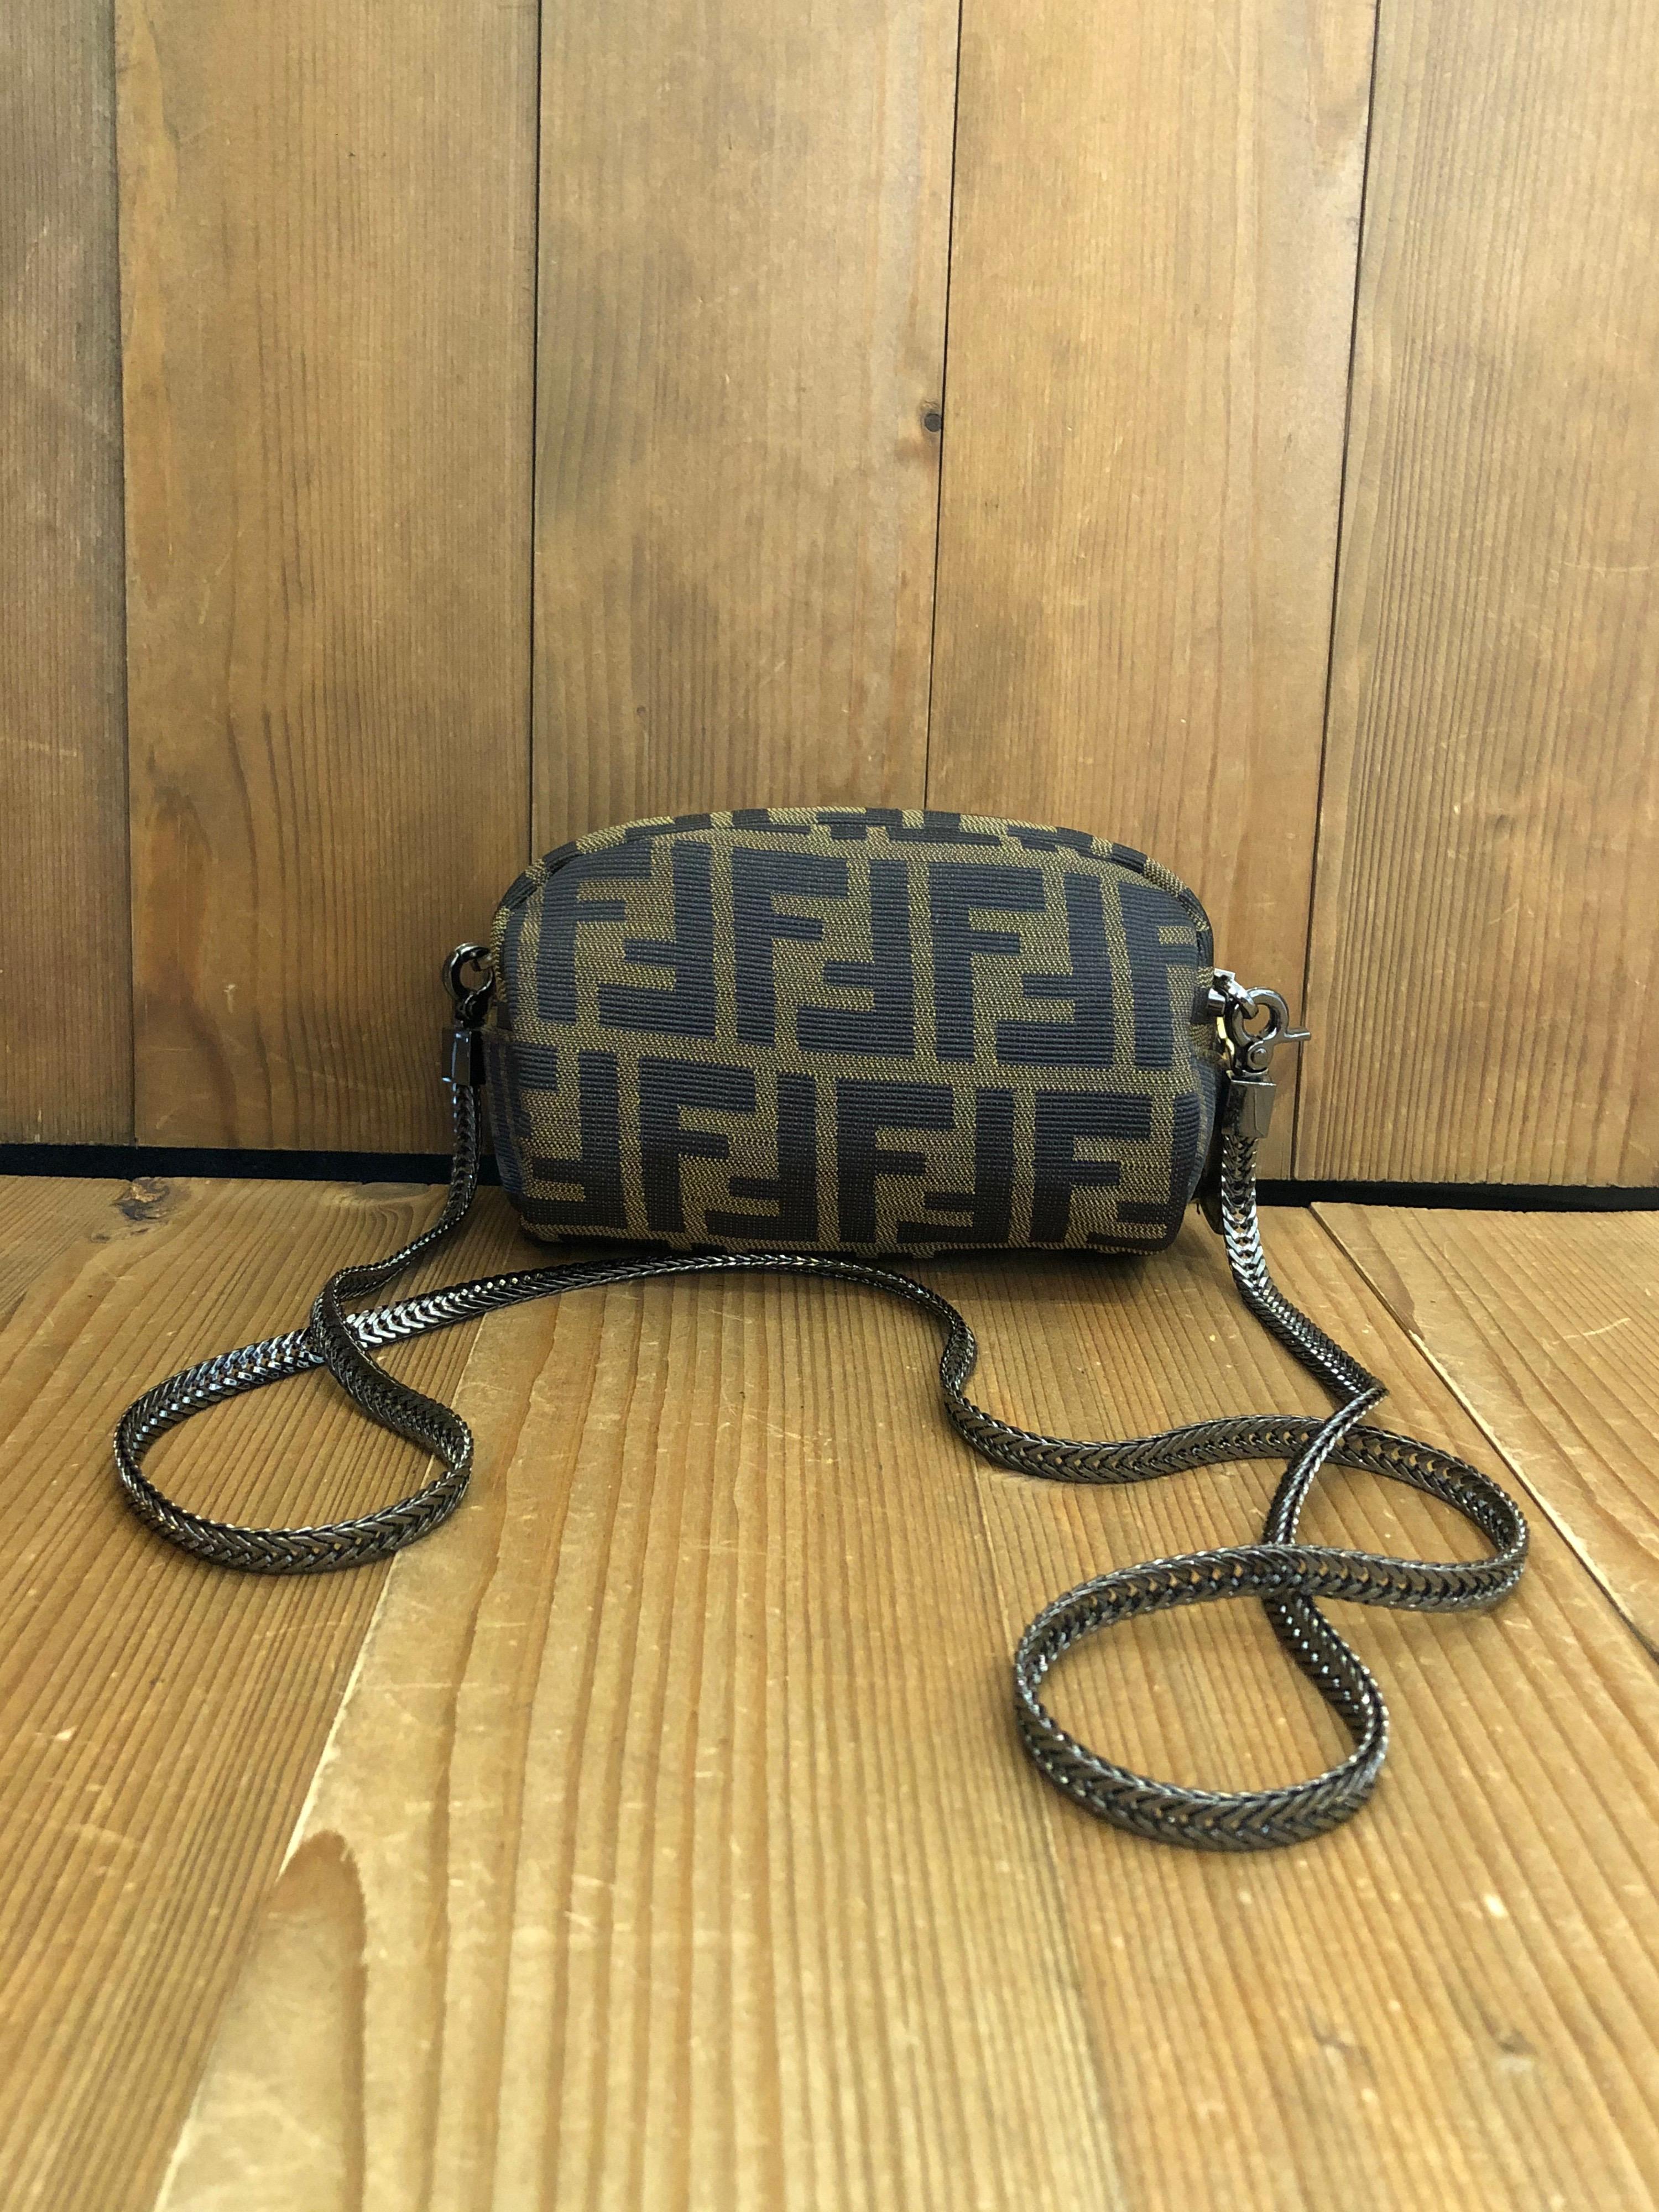 1990s Fendi cosmetic pouch in Fendi’s iconic FF Zucca jacquard. Made in Italy, Interior fully re-furnished. Third party clips and chain added to the pouch. 
Measures 5.75 x 3.5 x 2.75 inches (does NOT fit cell phone）

Condition： 
Outside: Minor